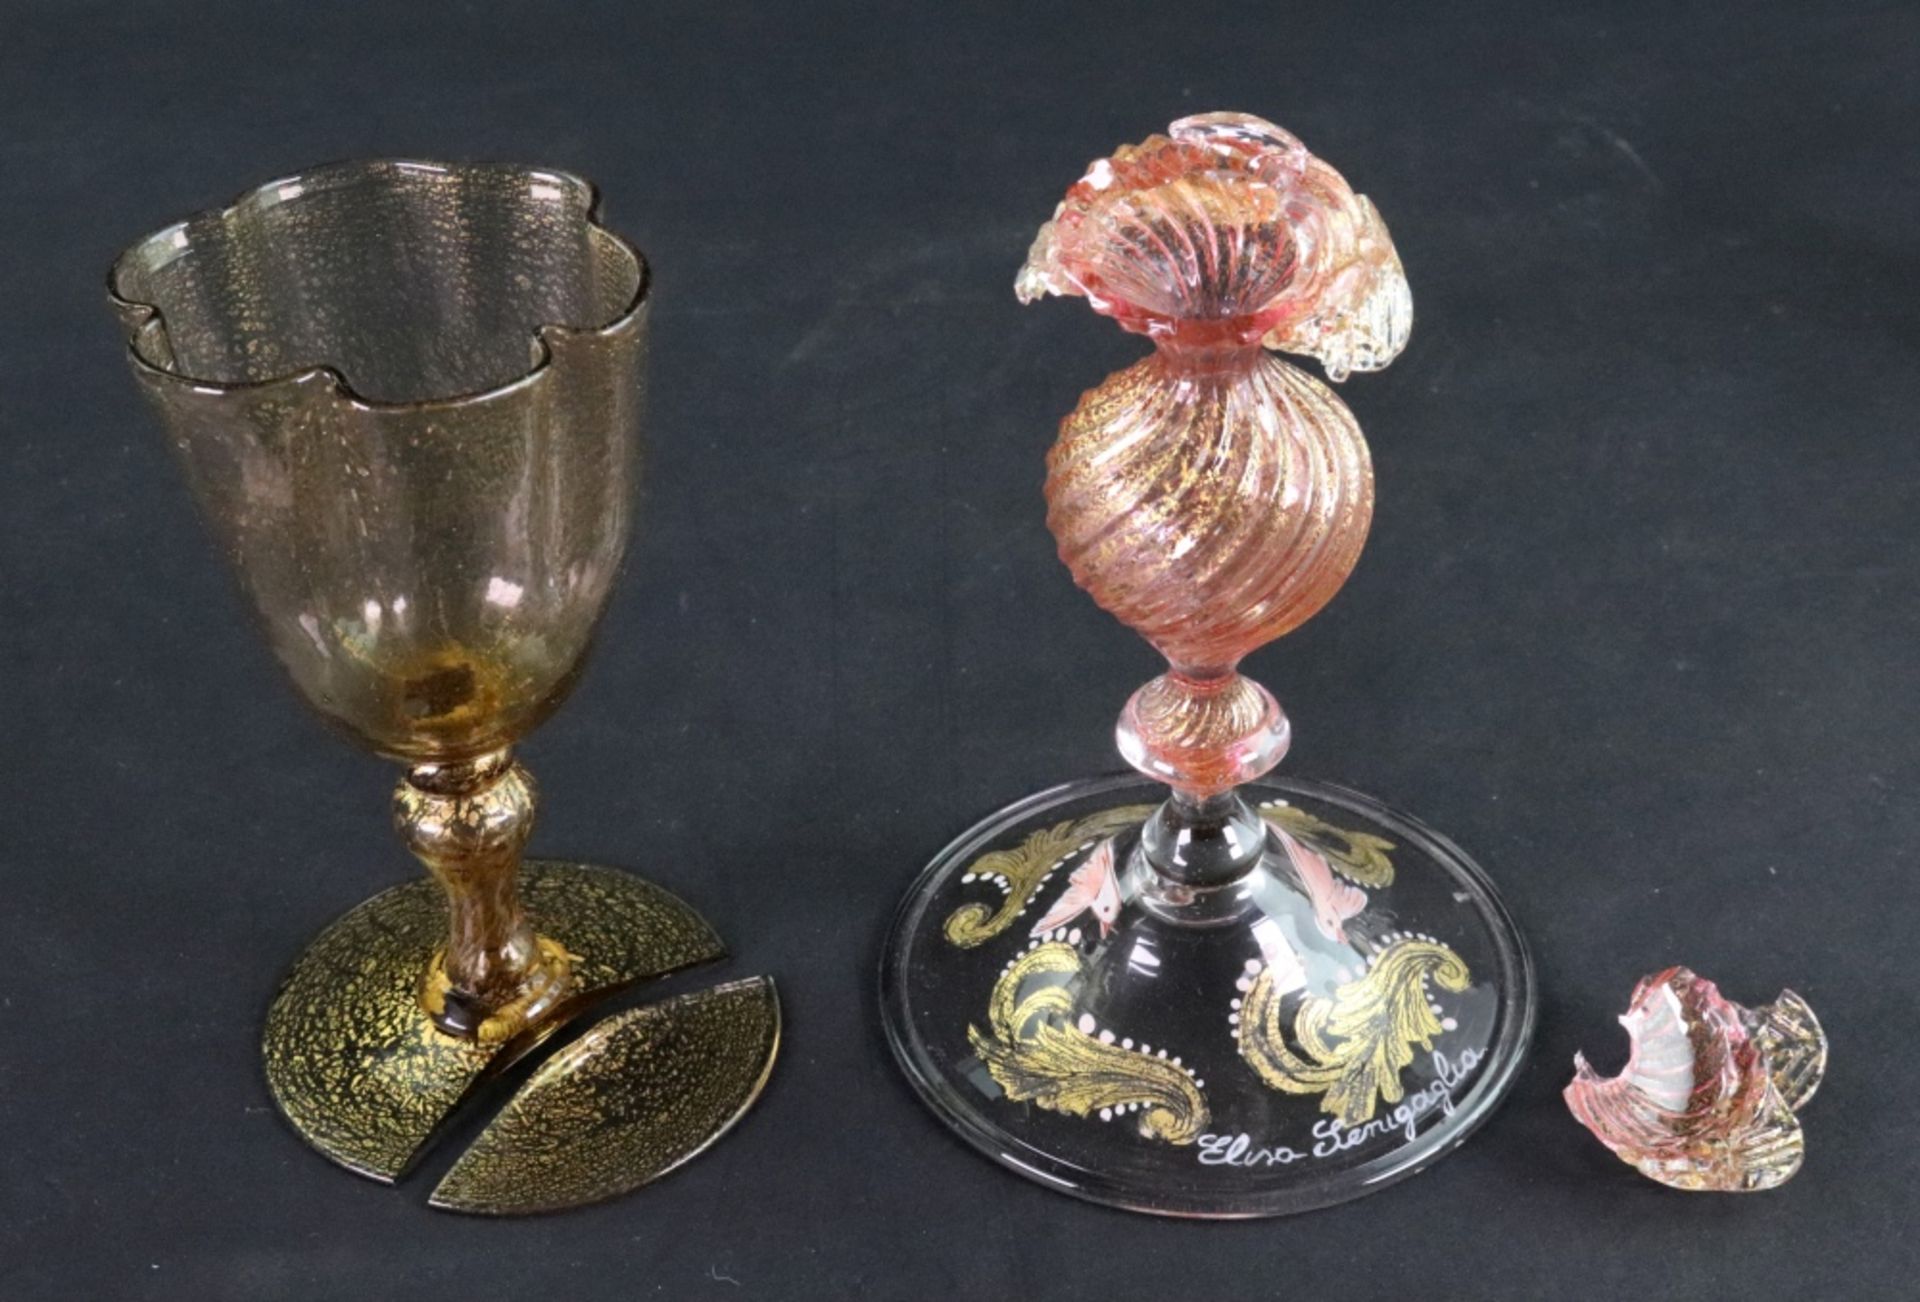 A Venetian glass goblet, in 17th century style, gilt and enamelled with leaf scrolls, - Bild 2 aus 3